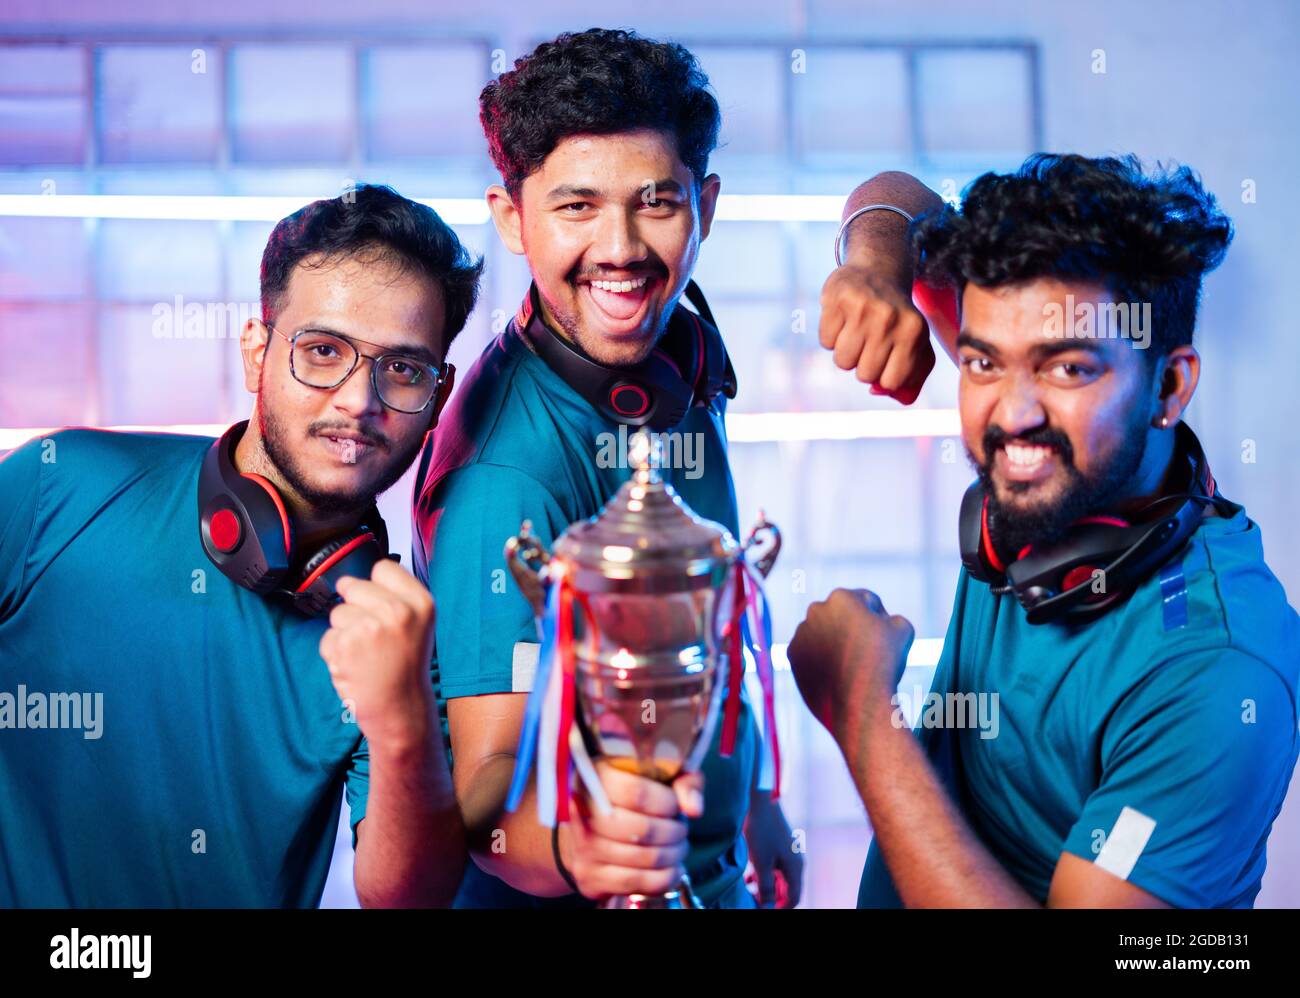 Team of Excited Cheerful gamers with headphones celebrating by dancing and holding winning trophy at esports gaming tournament stage Stock Photo